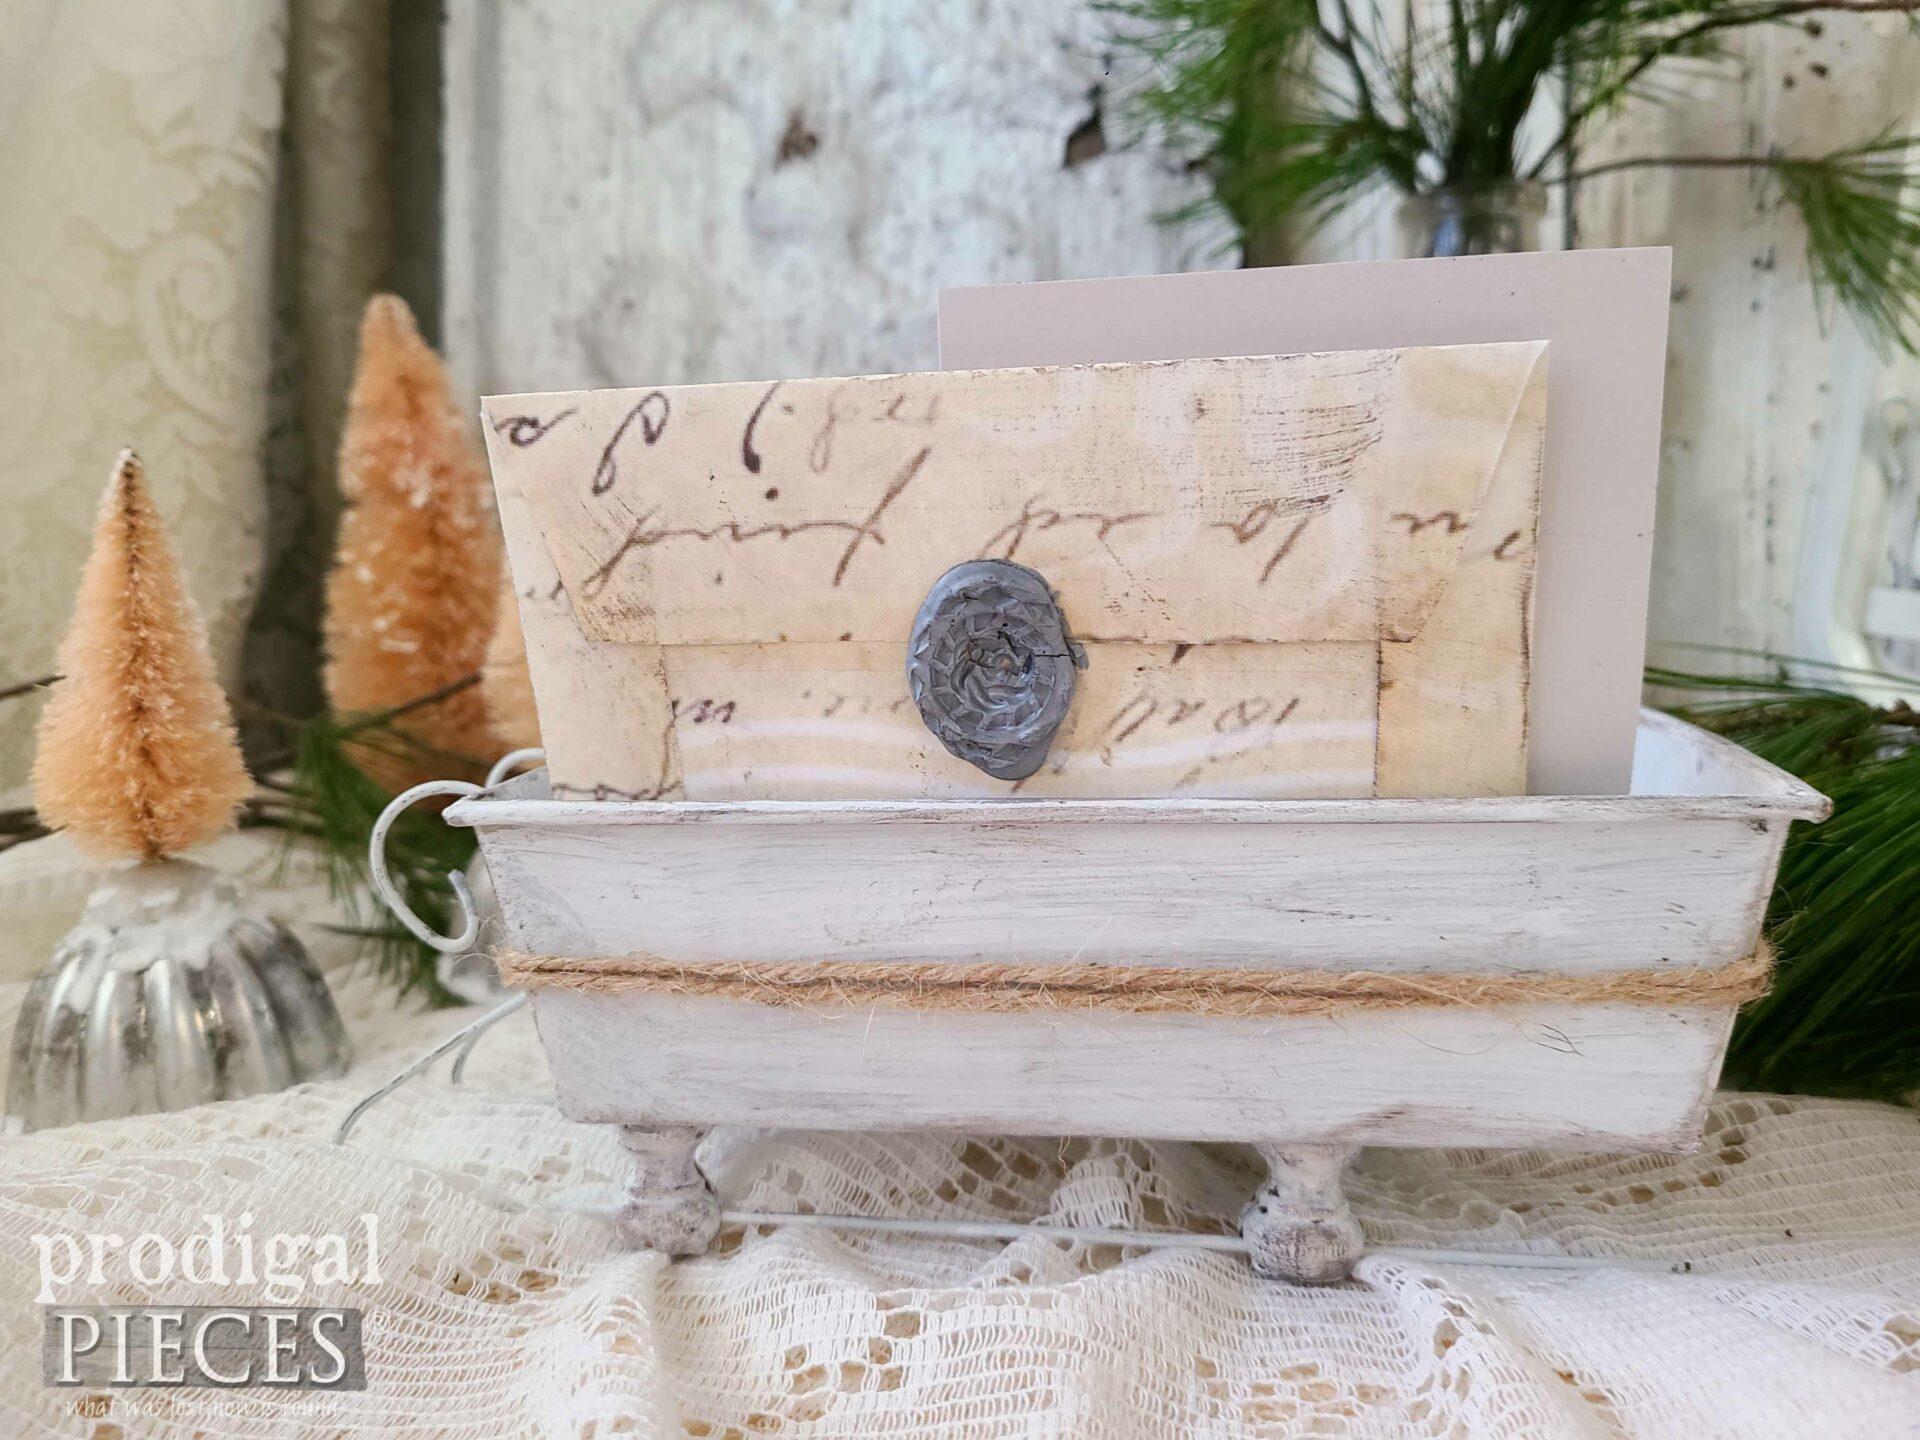 DIY Wax Seal Stamp Envelope for Repurposed Christmas Ornaments by Larissa of Prodigal Pieces | prodigalpieces.com #prodigalpieces #diy #crafts